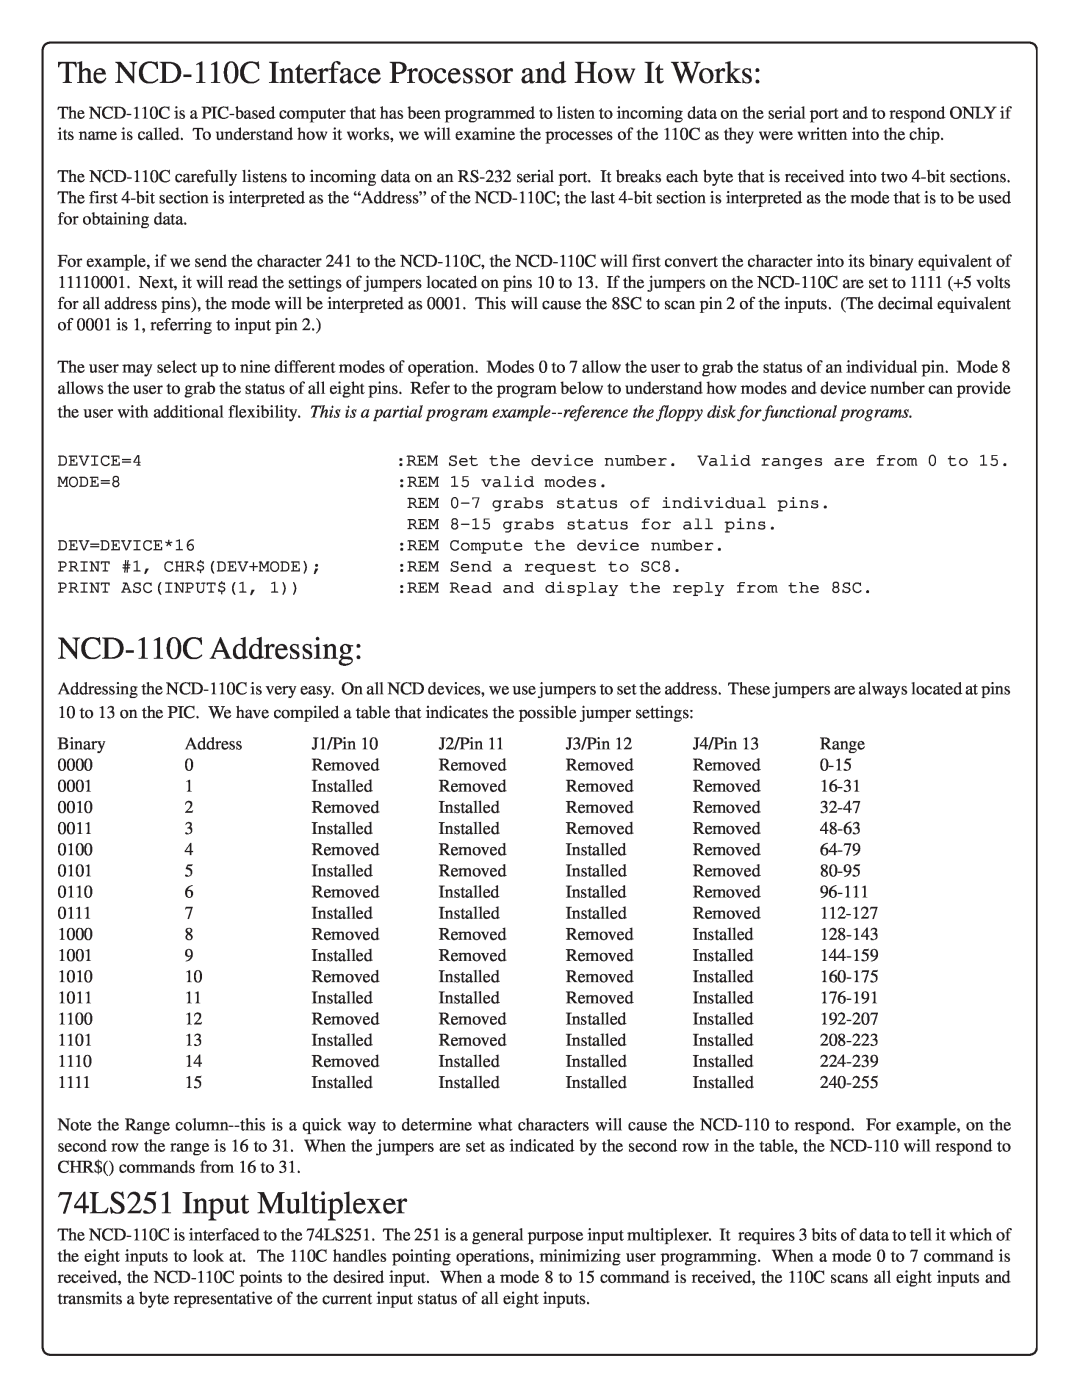 IBM RS-232 manual The NCD-110C Interface Processor and How It Works, NCD-110C Addressing, 74LS251 Input Multiplexer 